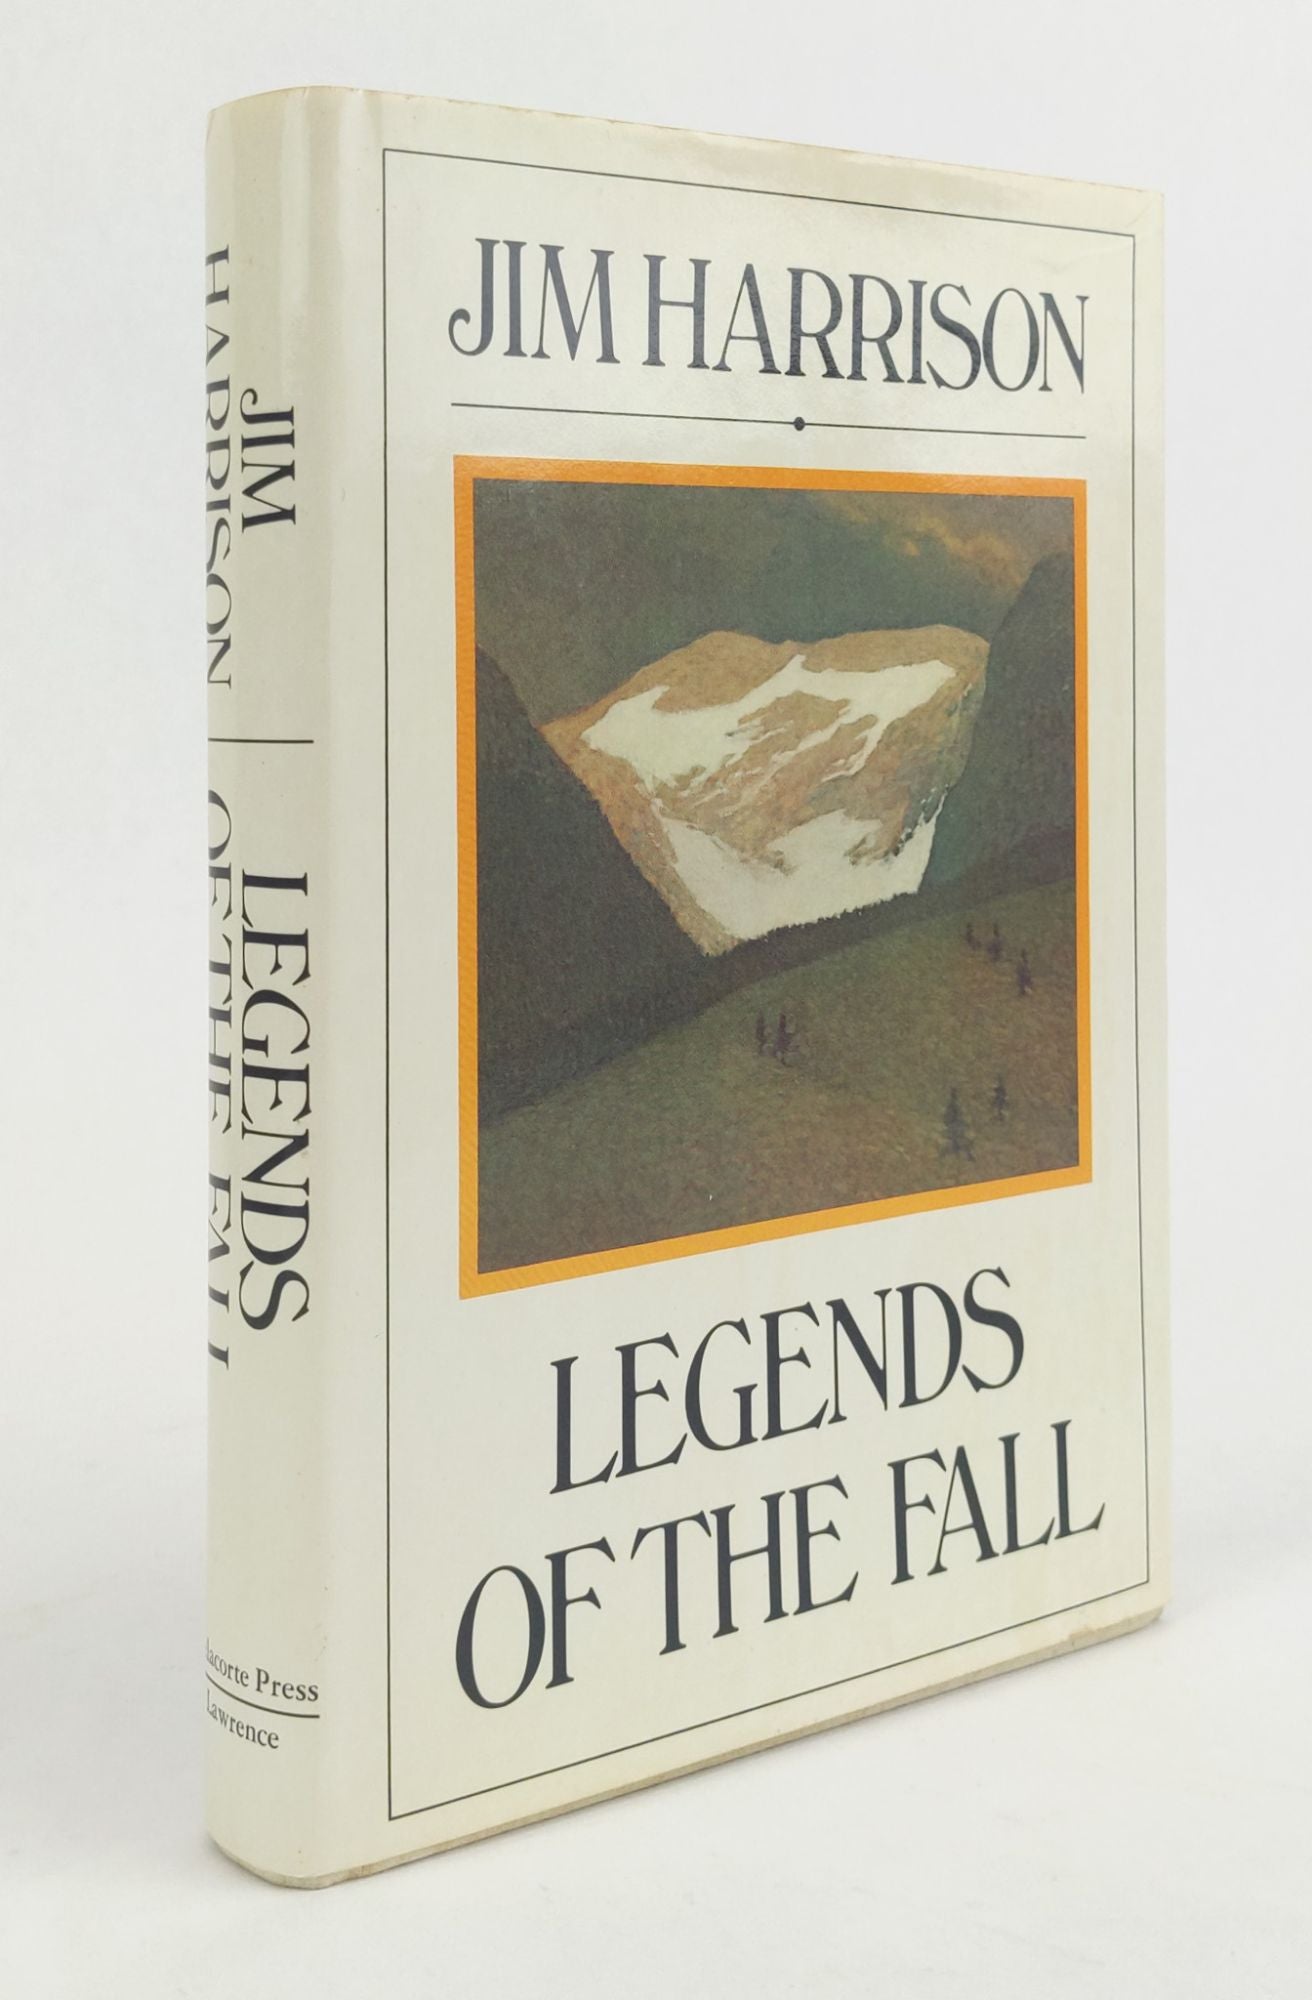 Product Image for LEGENDS OF THE FALL [Signed]